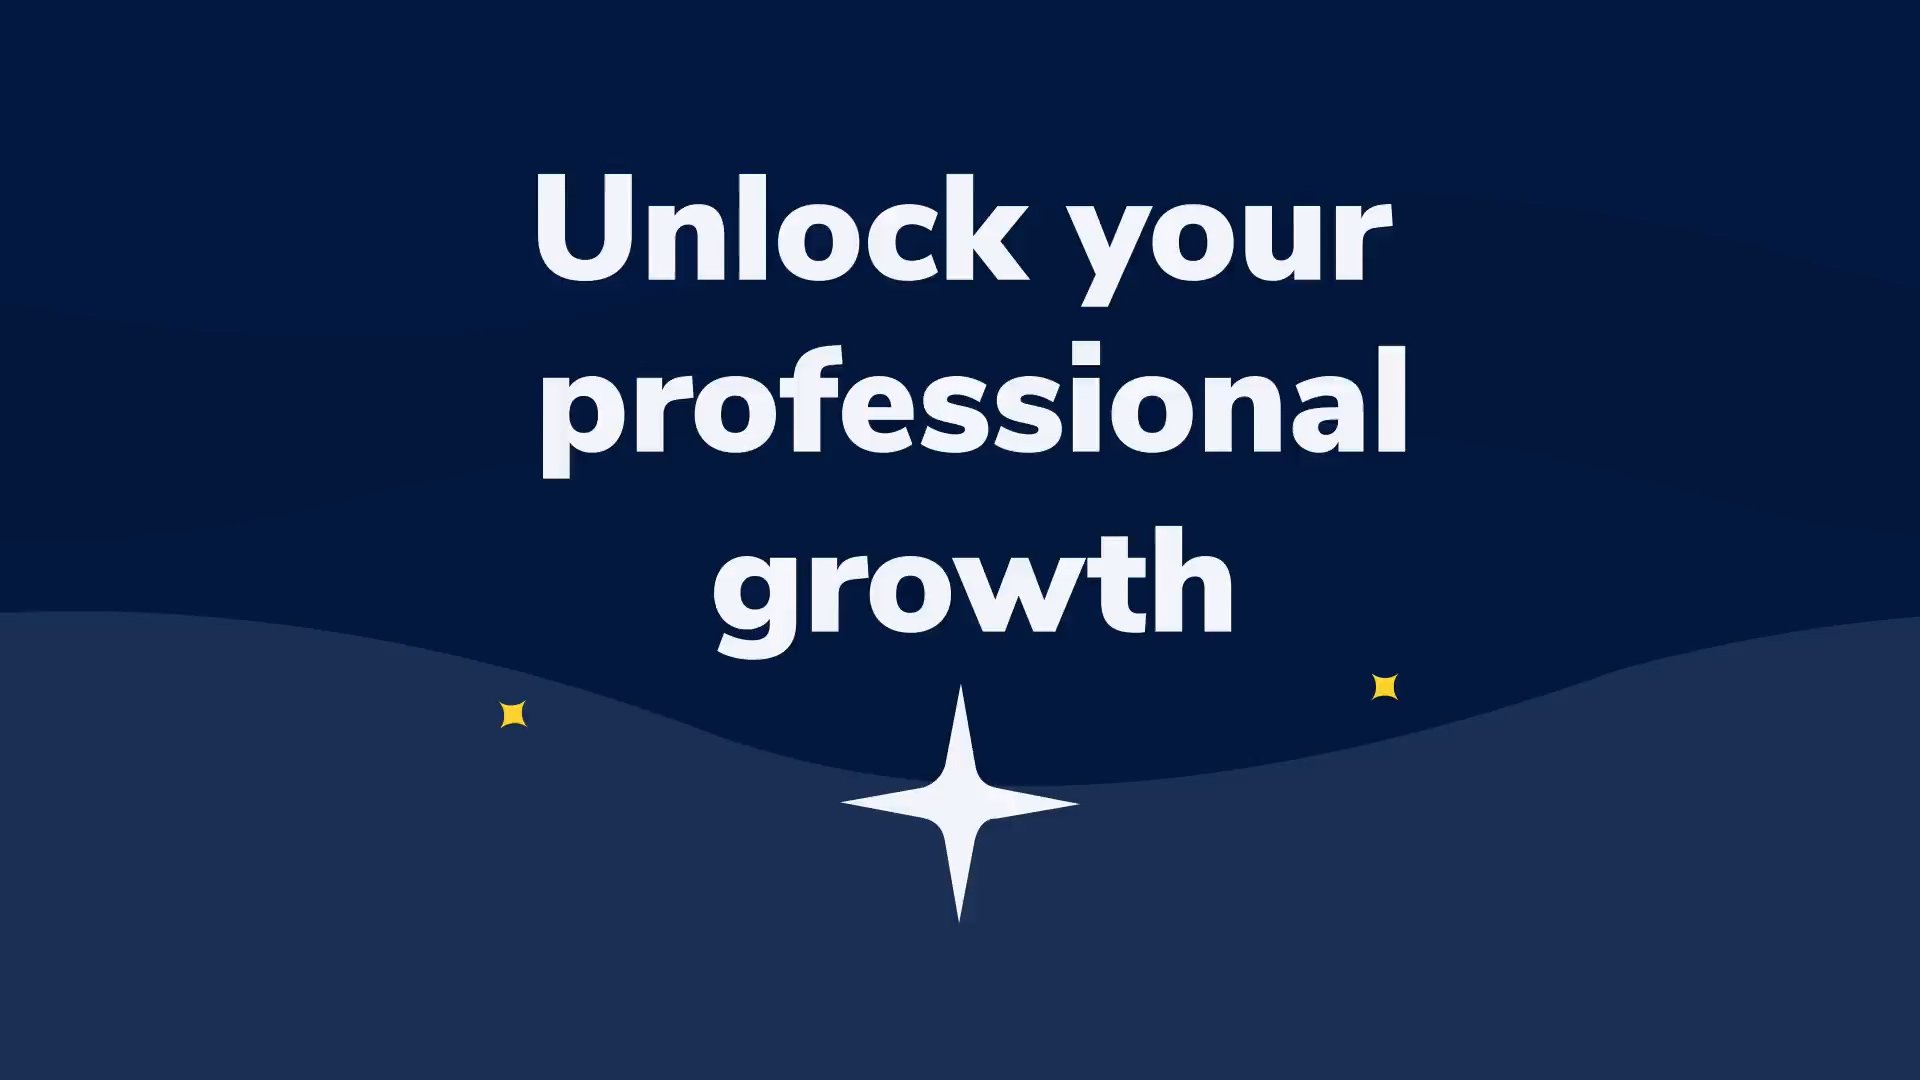 Intro slide of the video, text "Unlock your potential growth"